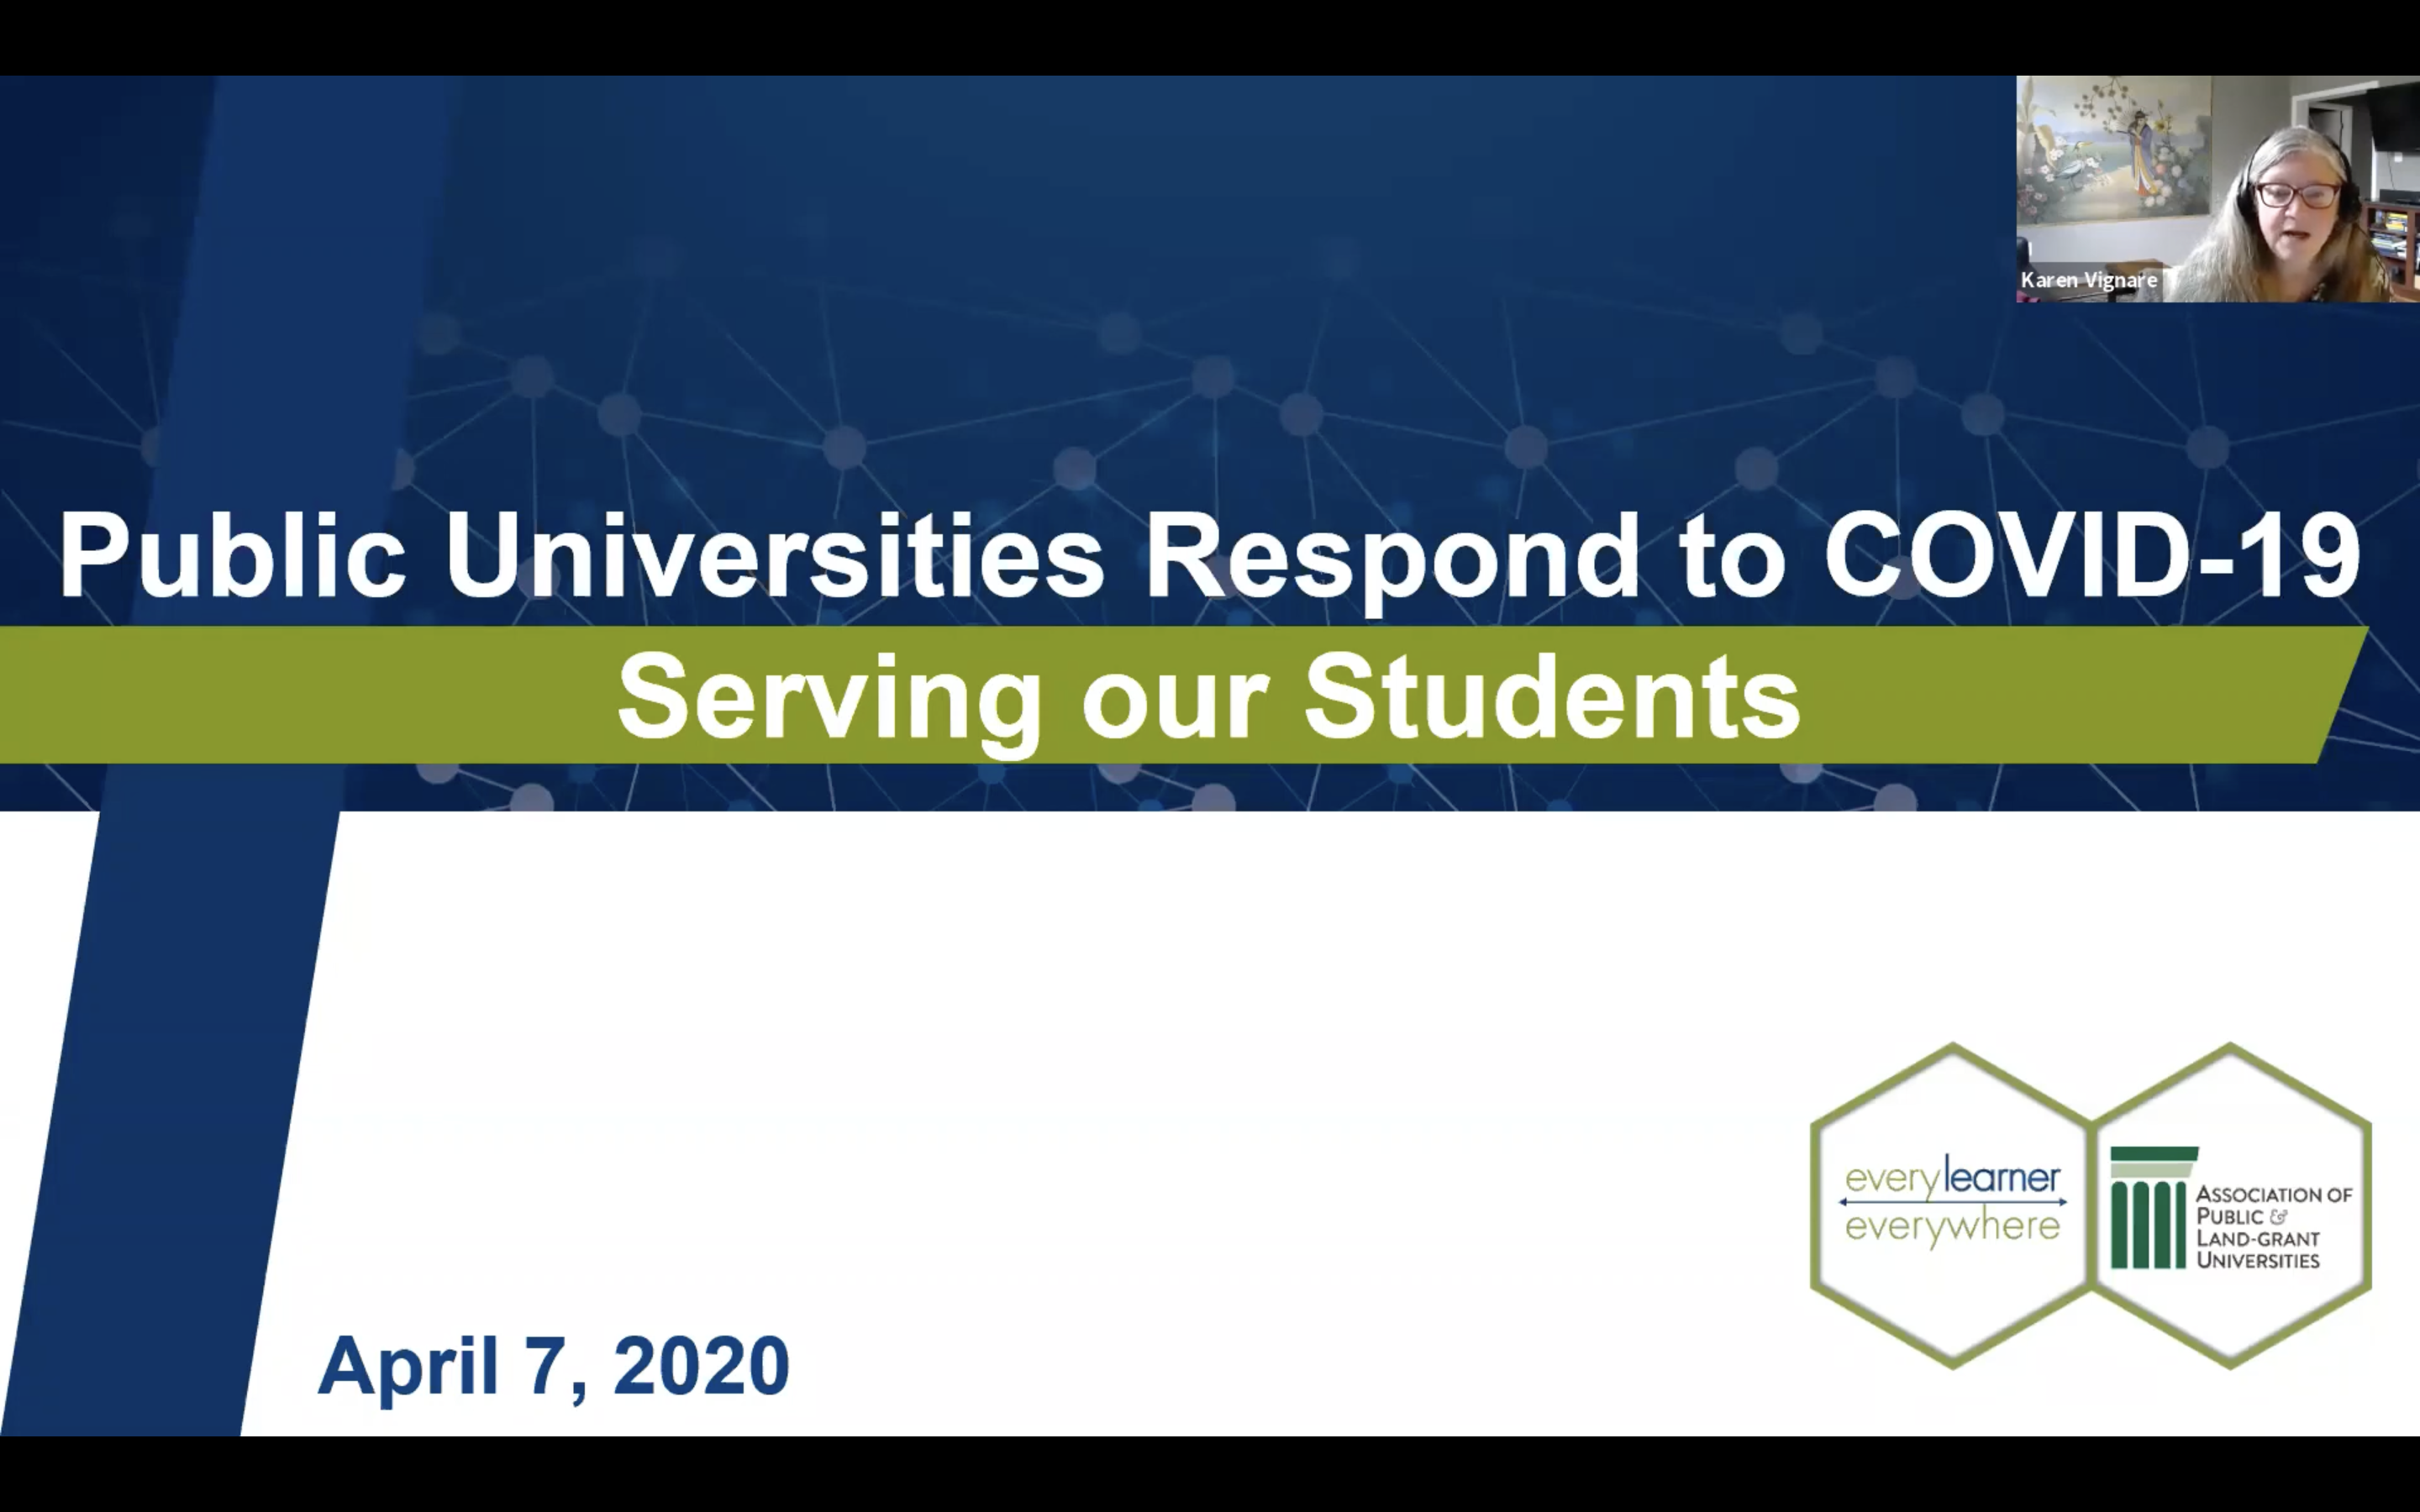 Public Universities Respond to COVID-19, serving our students thumbnail